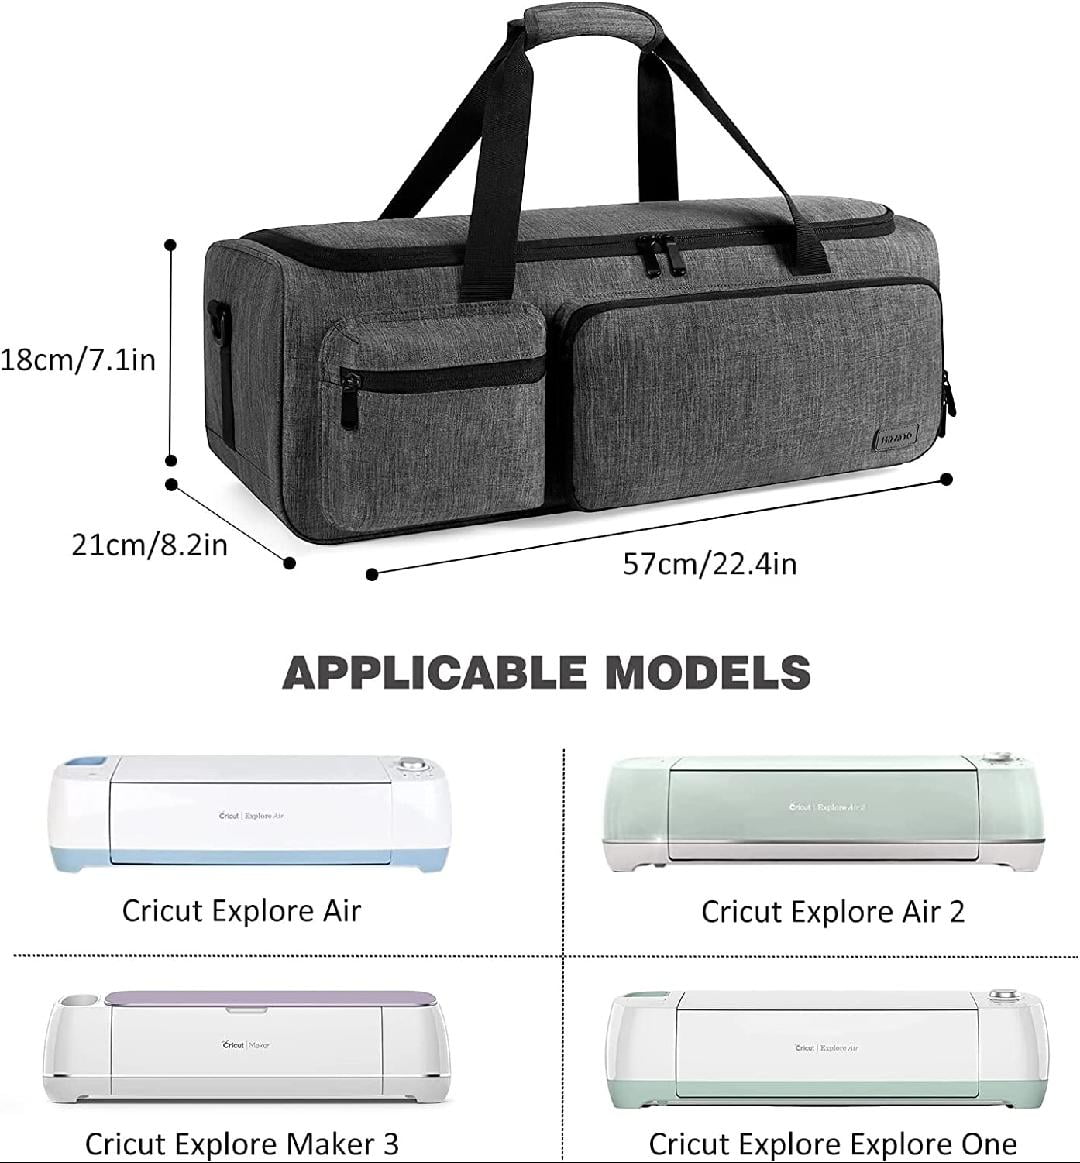 LZXYBIN Carrying Case for Cricut Maker 3/Maker/Explore 3/Explore Air 2 (Bag  Only) with Dust Cover, Cutting Mat Pocket Tote Bag for Cricut